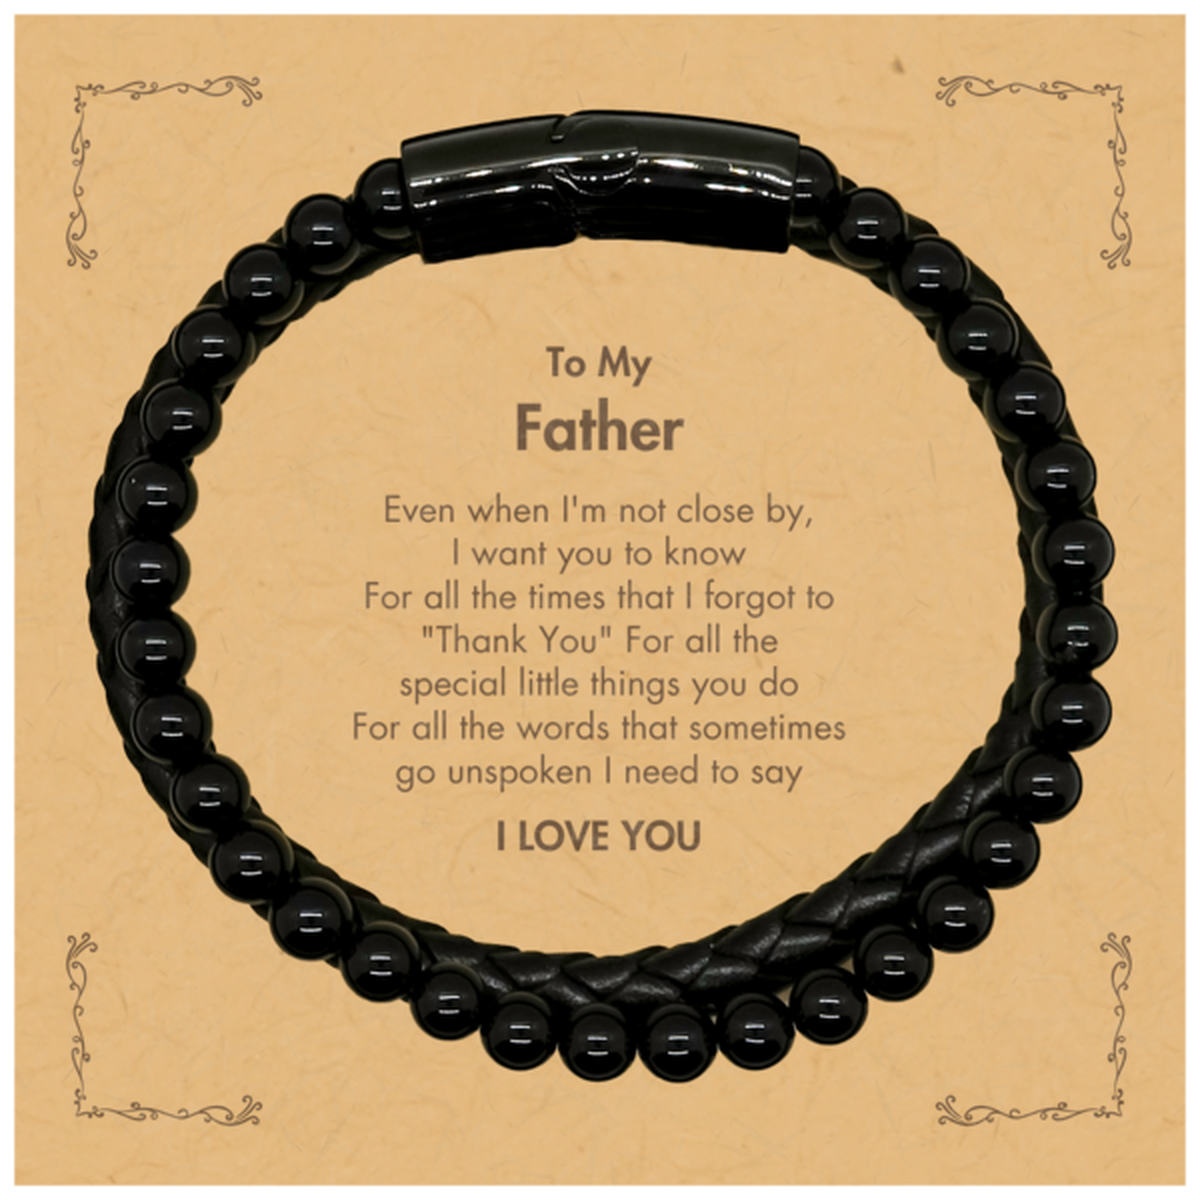 Thank You Gifts for Father, Keepsake Stone Leather Bracelets Gifts for Father Birthday Mother's day Father's Day Father For all the words That sometimes go unspoken I need to say I LOVE YOU